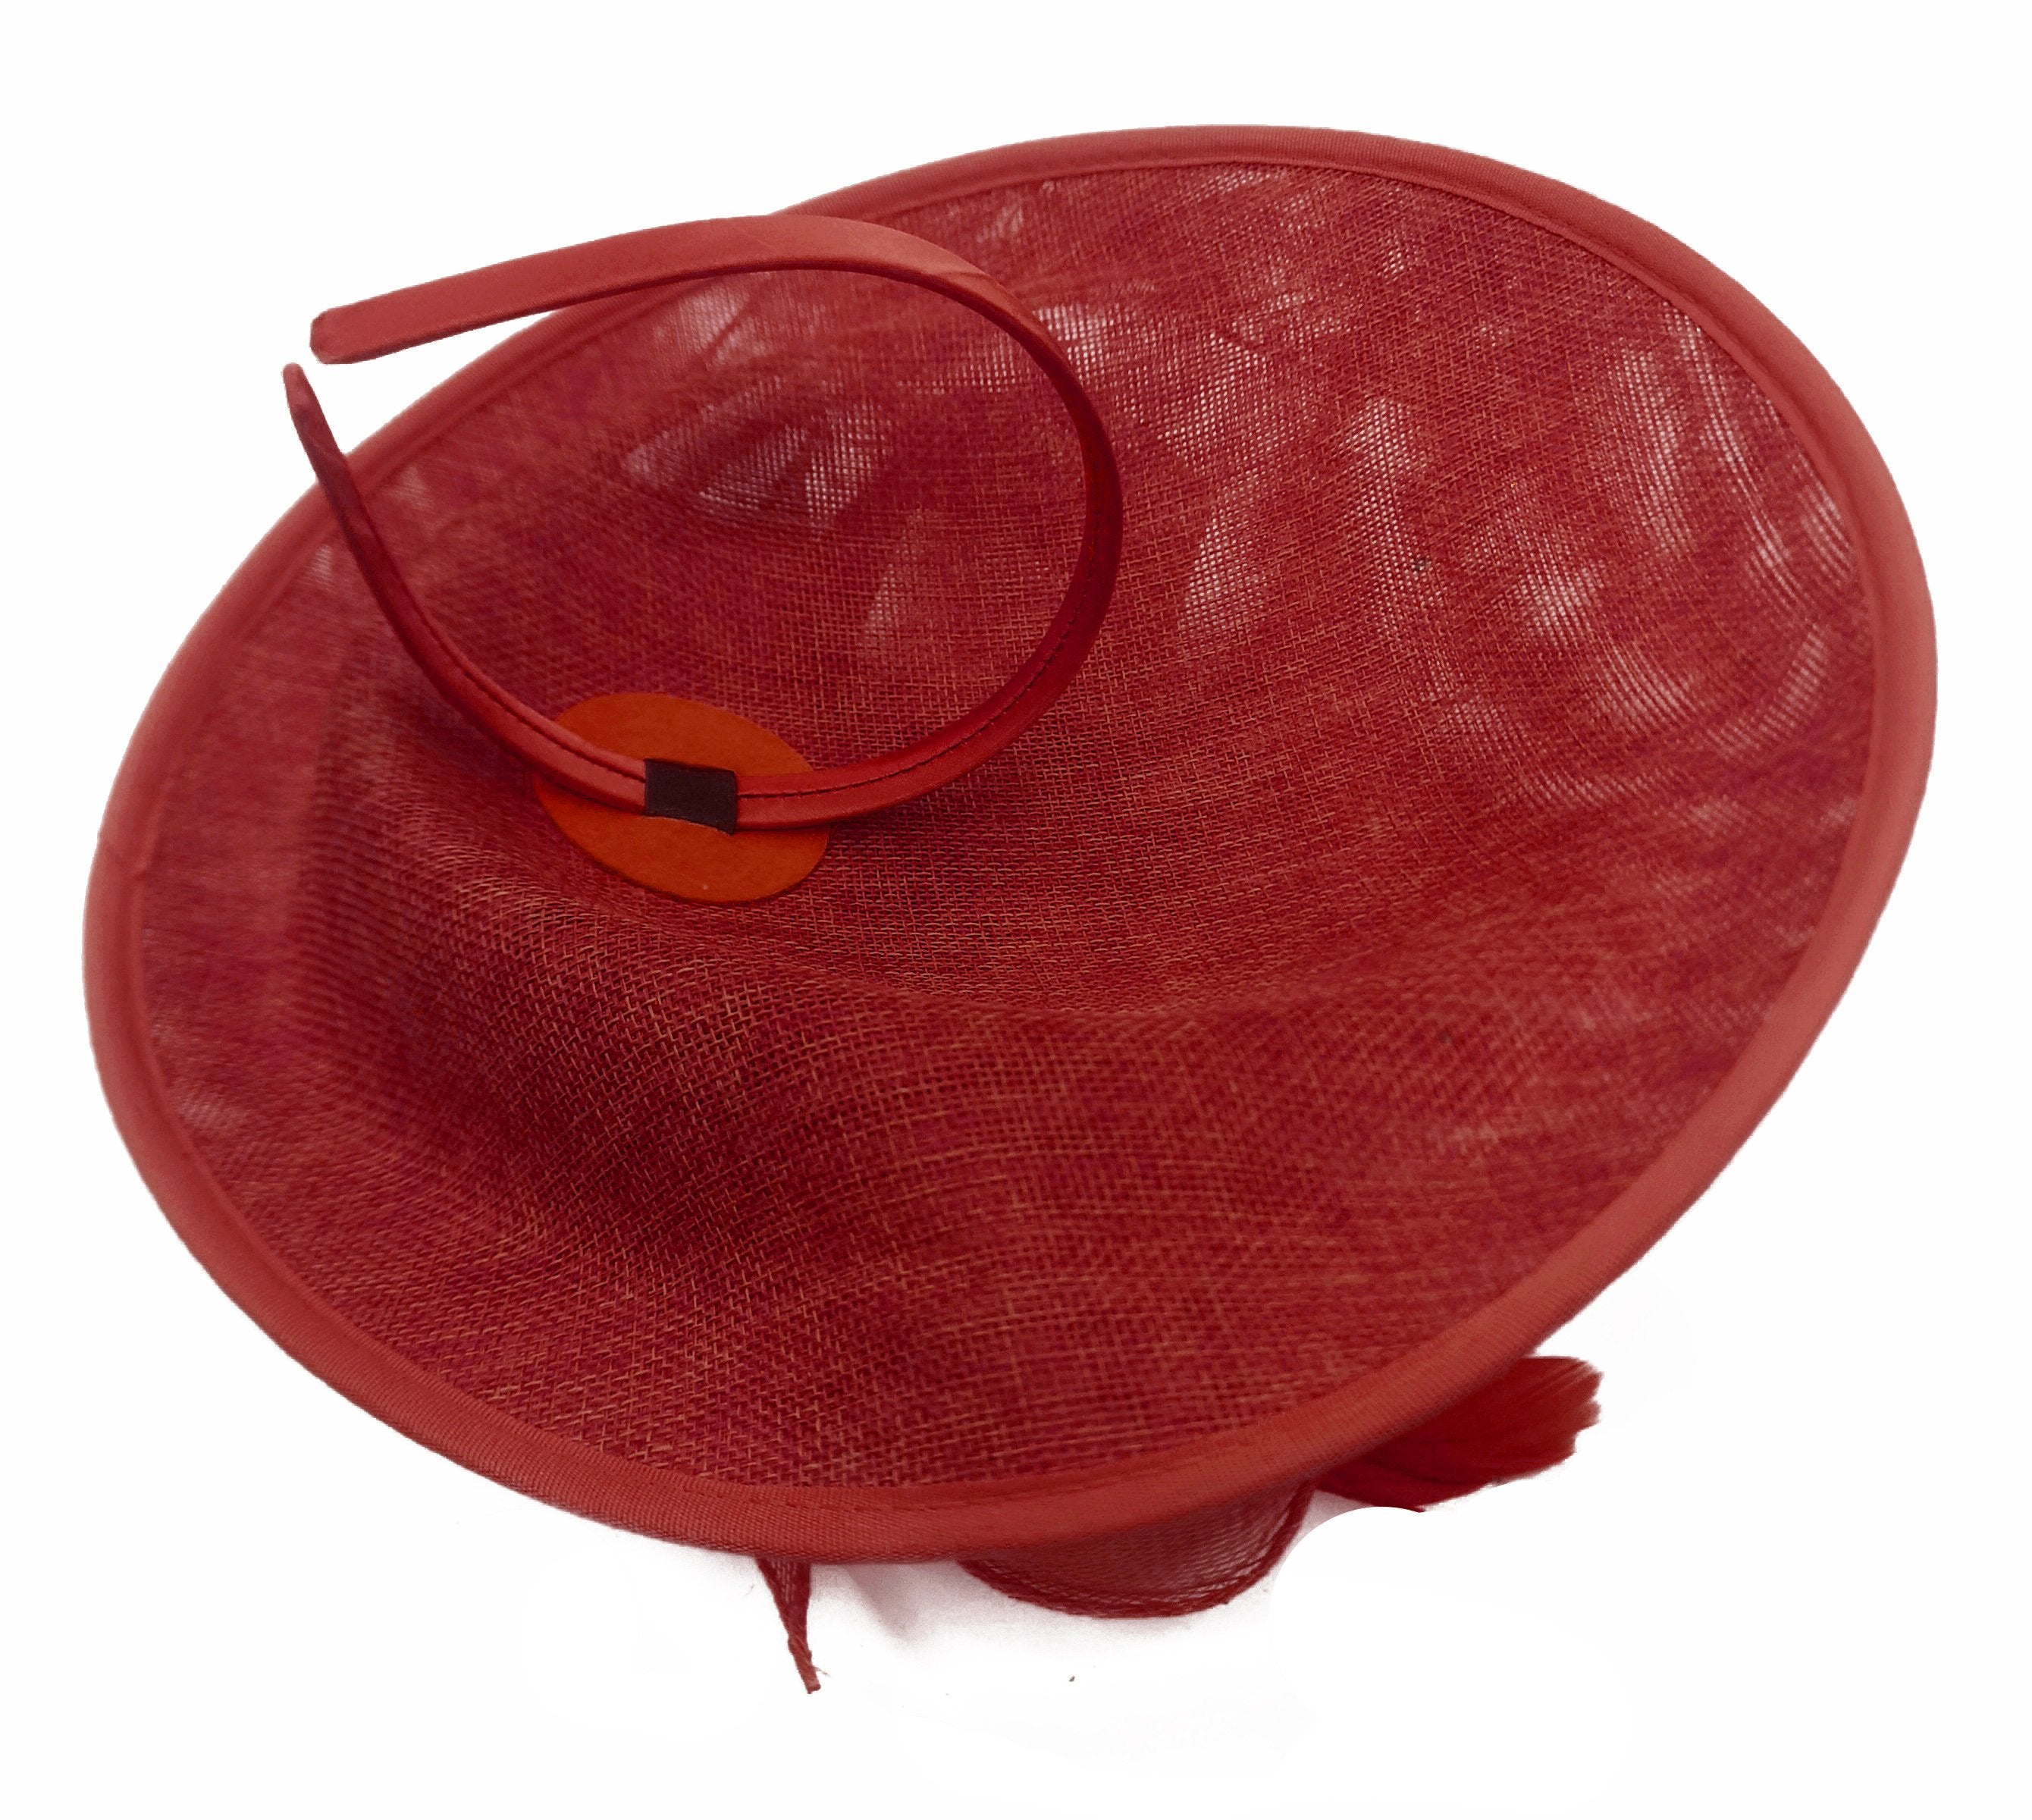 Caprilite Big Saucer Sinamay Red & Dusty Pink Mixed Colour Fascinator On Headband